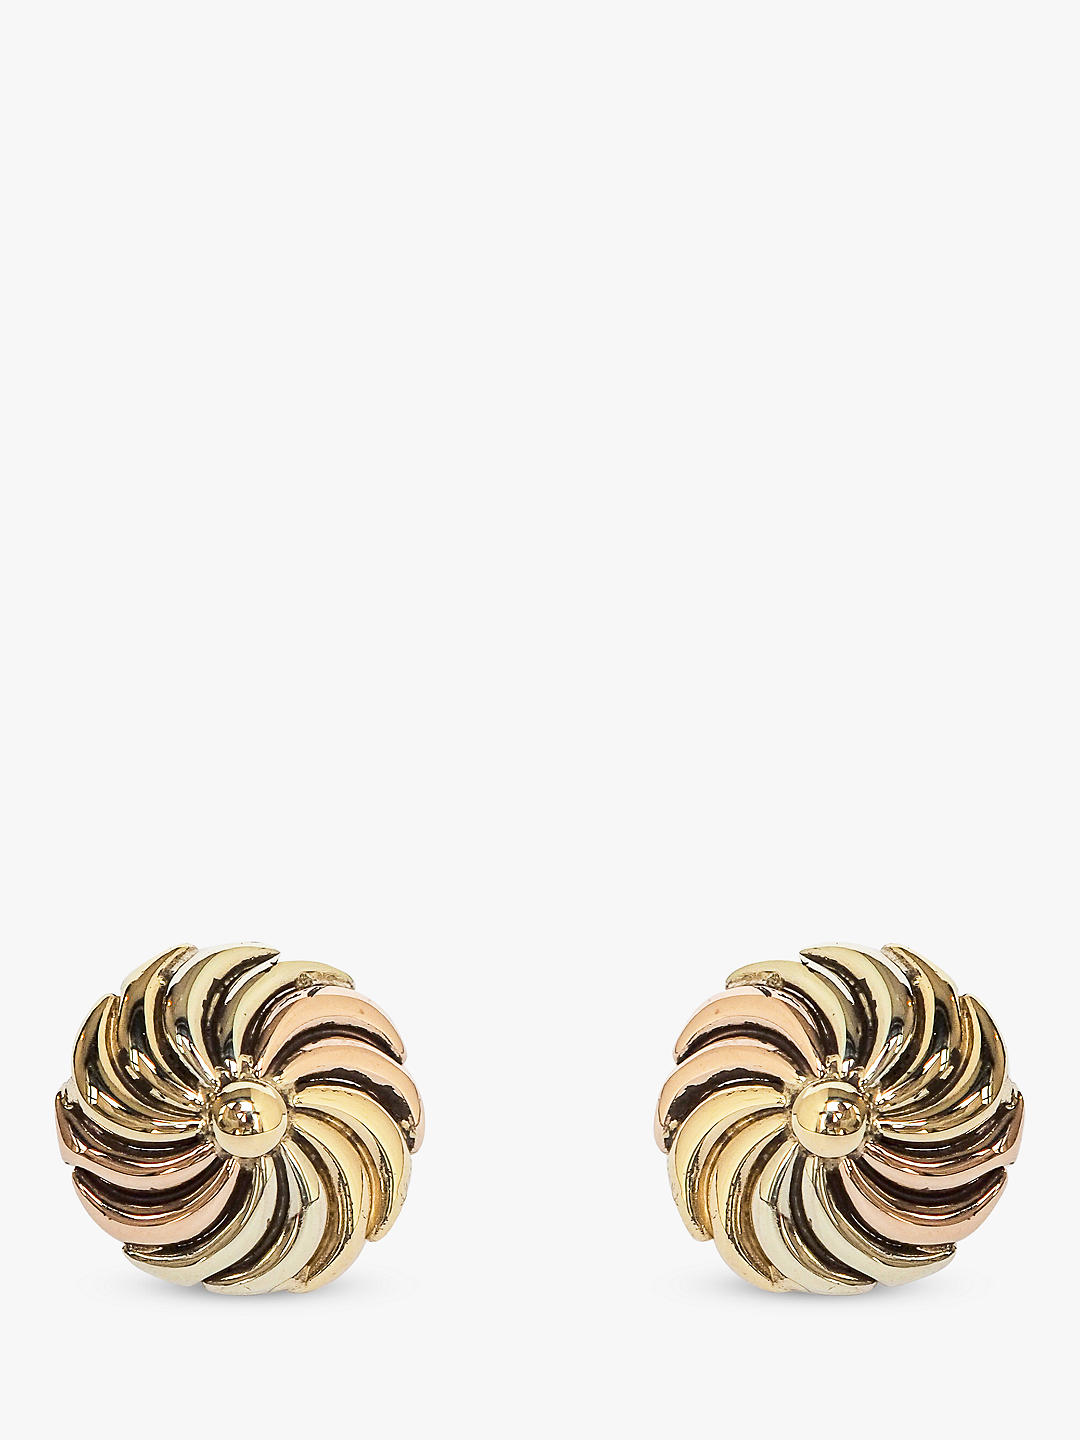 L & T Heirlooms Second Hand 9ct Tri-Colour Gold Swirl Stud Earrings